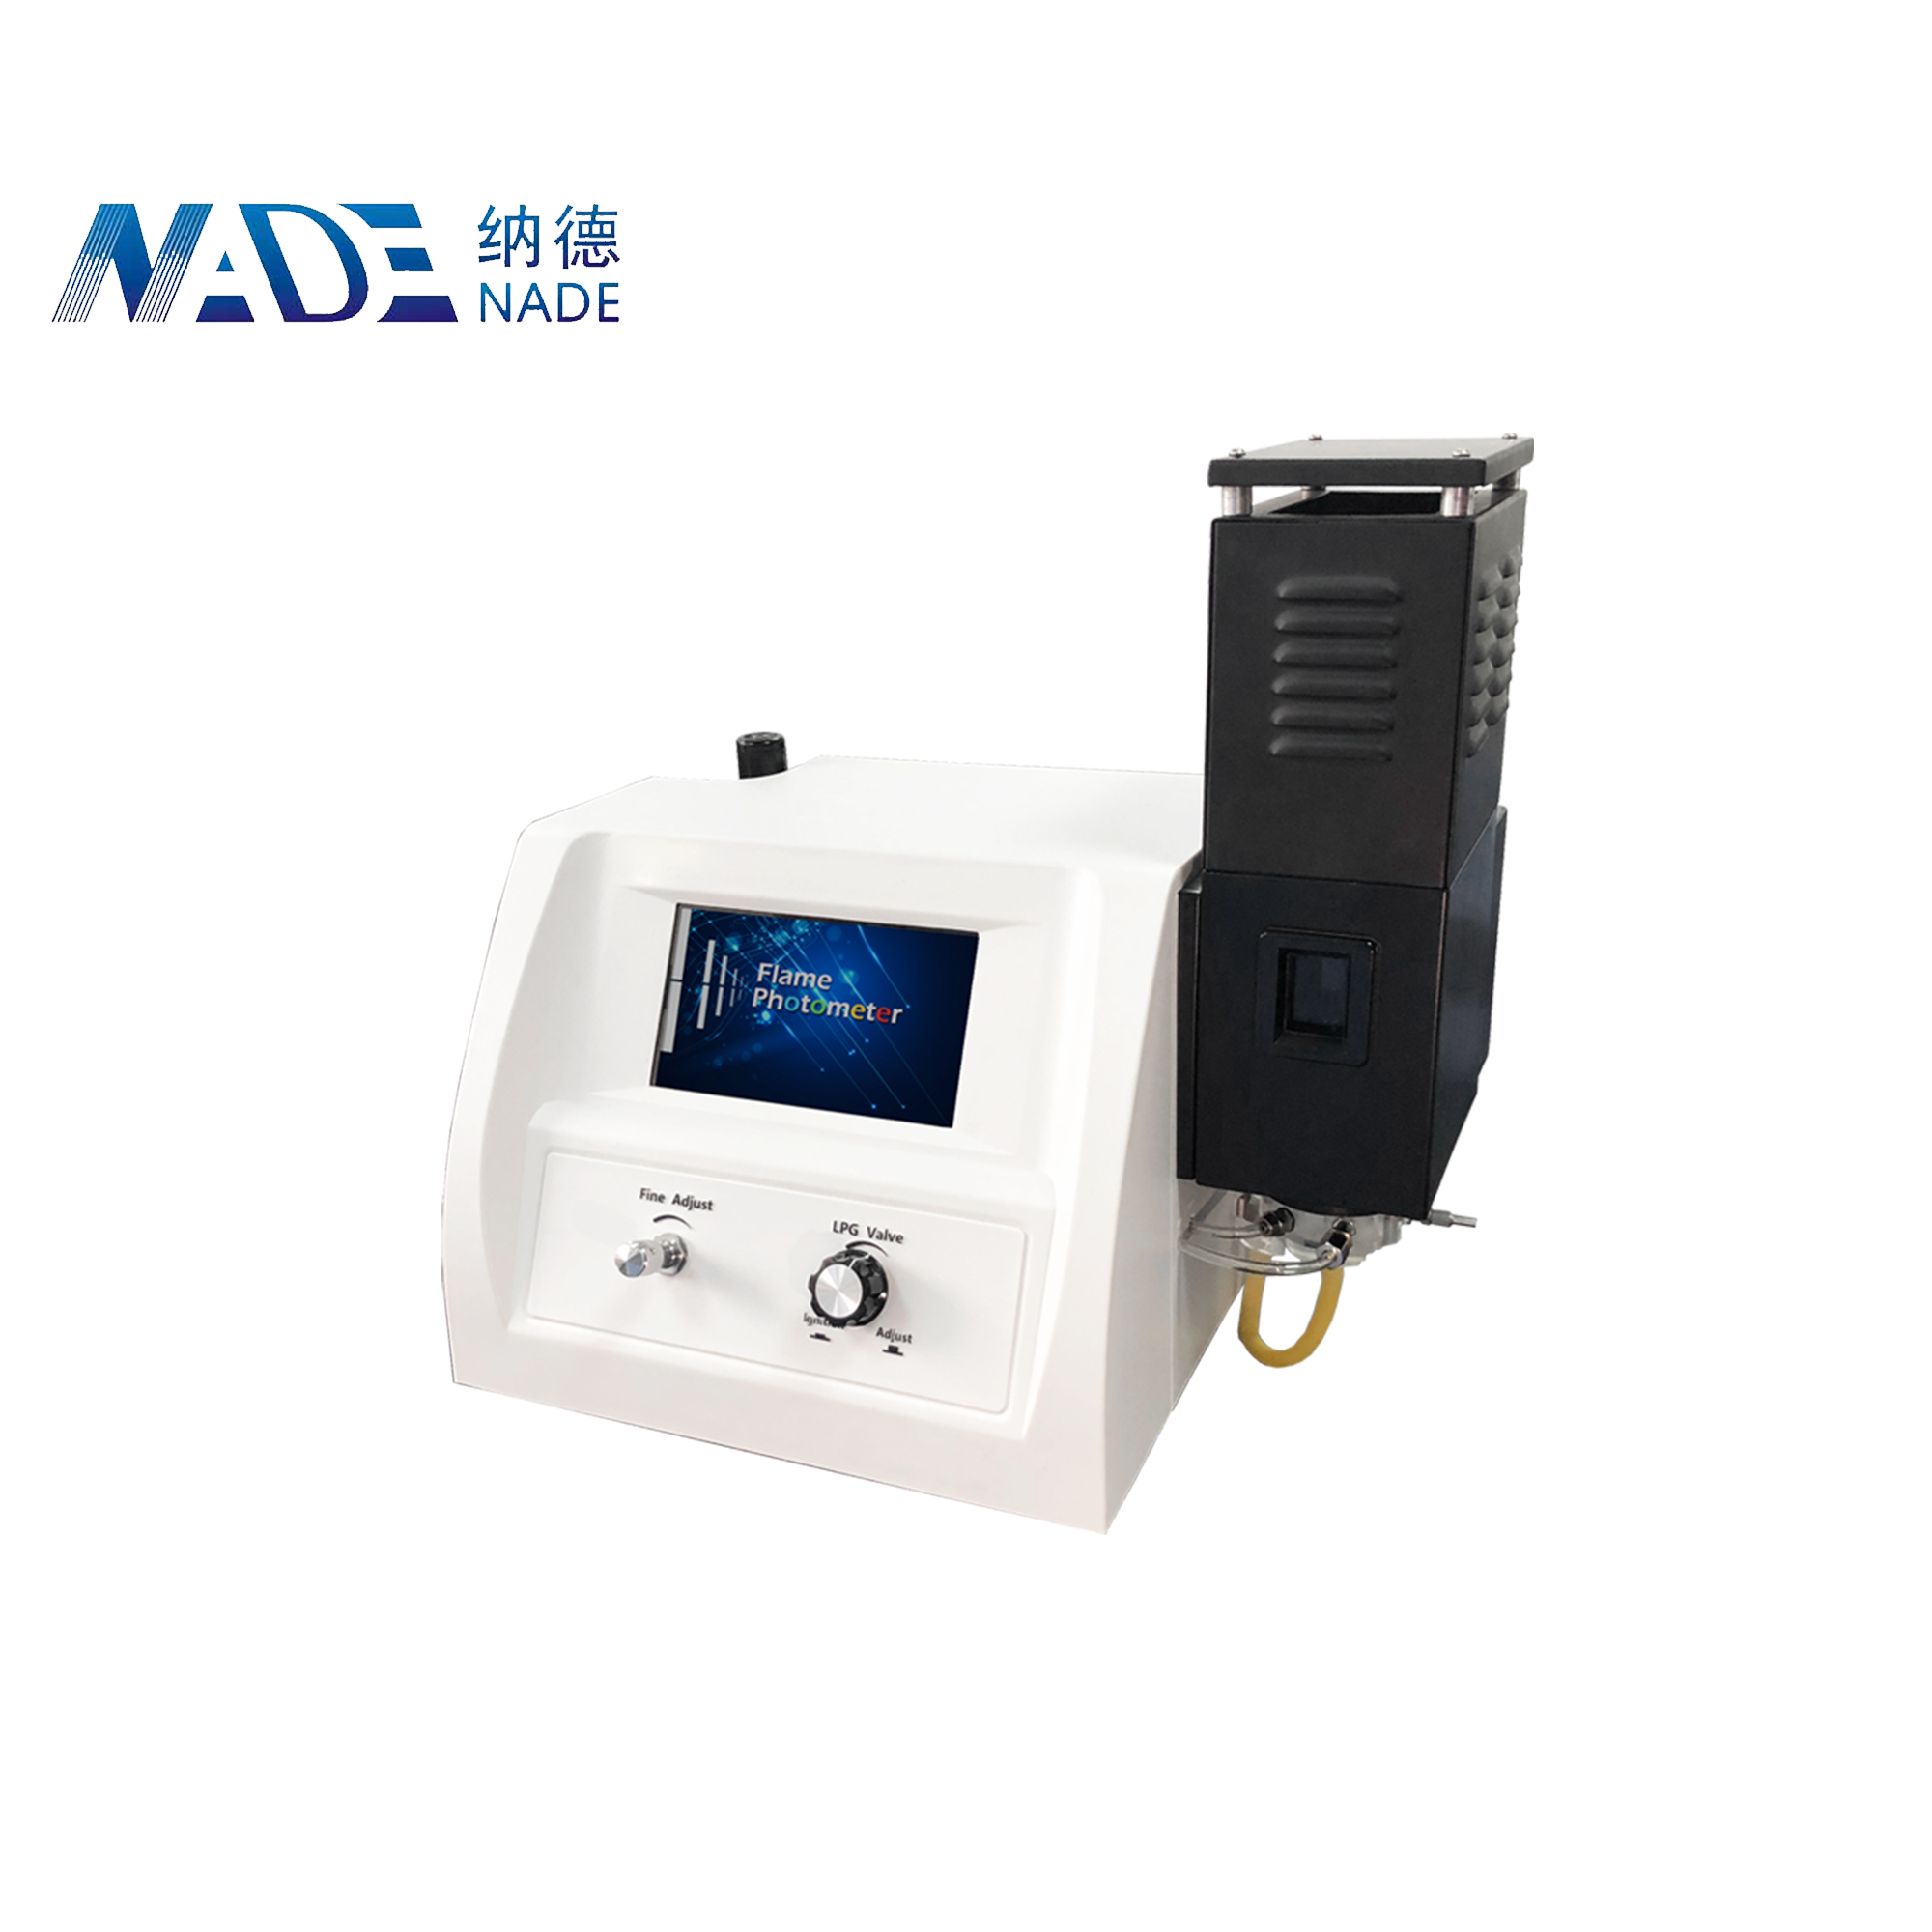 NADE Flame photometer FP6431 analysis K, Na, Ca of agricultural fertilizers or soil digital Flame photometer